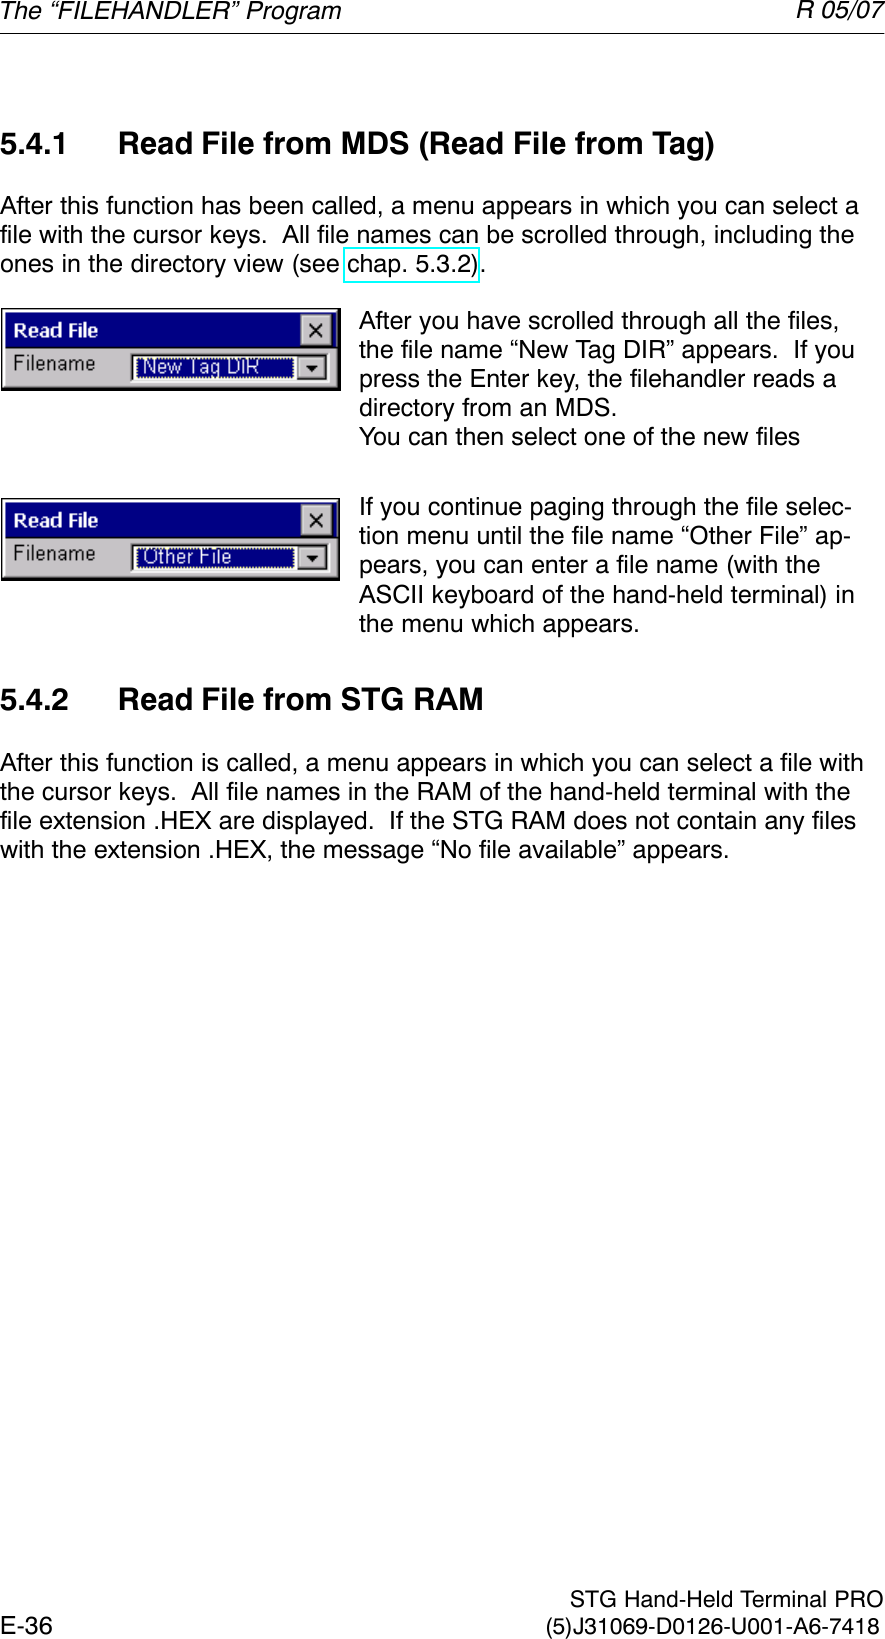 R 05/07E-36  STG Hand-Held Terminal PRO(5)J31069-D0126-U001-A6-74185.4.1 Read File from MDS (Read File from Tag)After this function has been called, a menu appears in which you can select afile with the cursor keys.  All file names can be scrolled through, including theones in the directory view (see chap. 5.3.2).After you have scrolled through all the files,the file name “New Tag DIR” appears.  If youpress the Enter key, the filehandler reads adirectory from an MDS.You can then select one of the new filesIf you continue paging through the file selec-tion menu until the file name “Other File” ap-pears, you can enter a file name (with theASCII keyboard of the hand-held terminal) inthe menu which appears.5.4.2 Read File from STG RAMAfter this function is called, a menu appears in which you can select a file withthe cursor keys.  All file names in the RAM of the hand-held terminal with thefile extension .HEX are displayed.  If the STG RAM does not contain any fileswith the extension .HEX, the message “No file available” appears.The “FILEHANDLER” Program